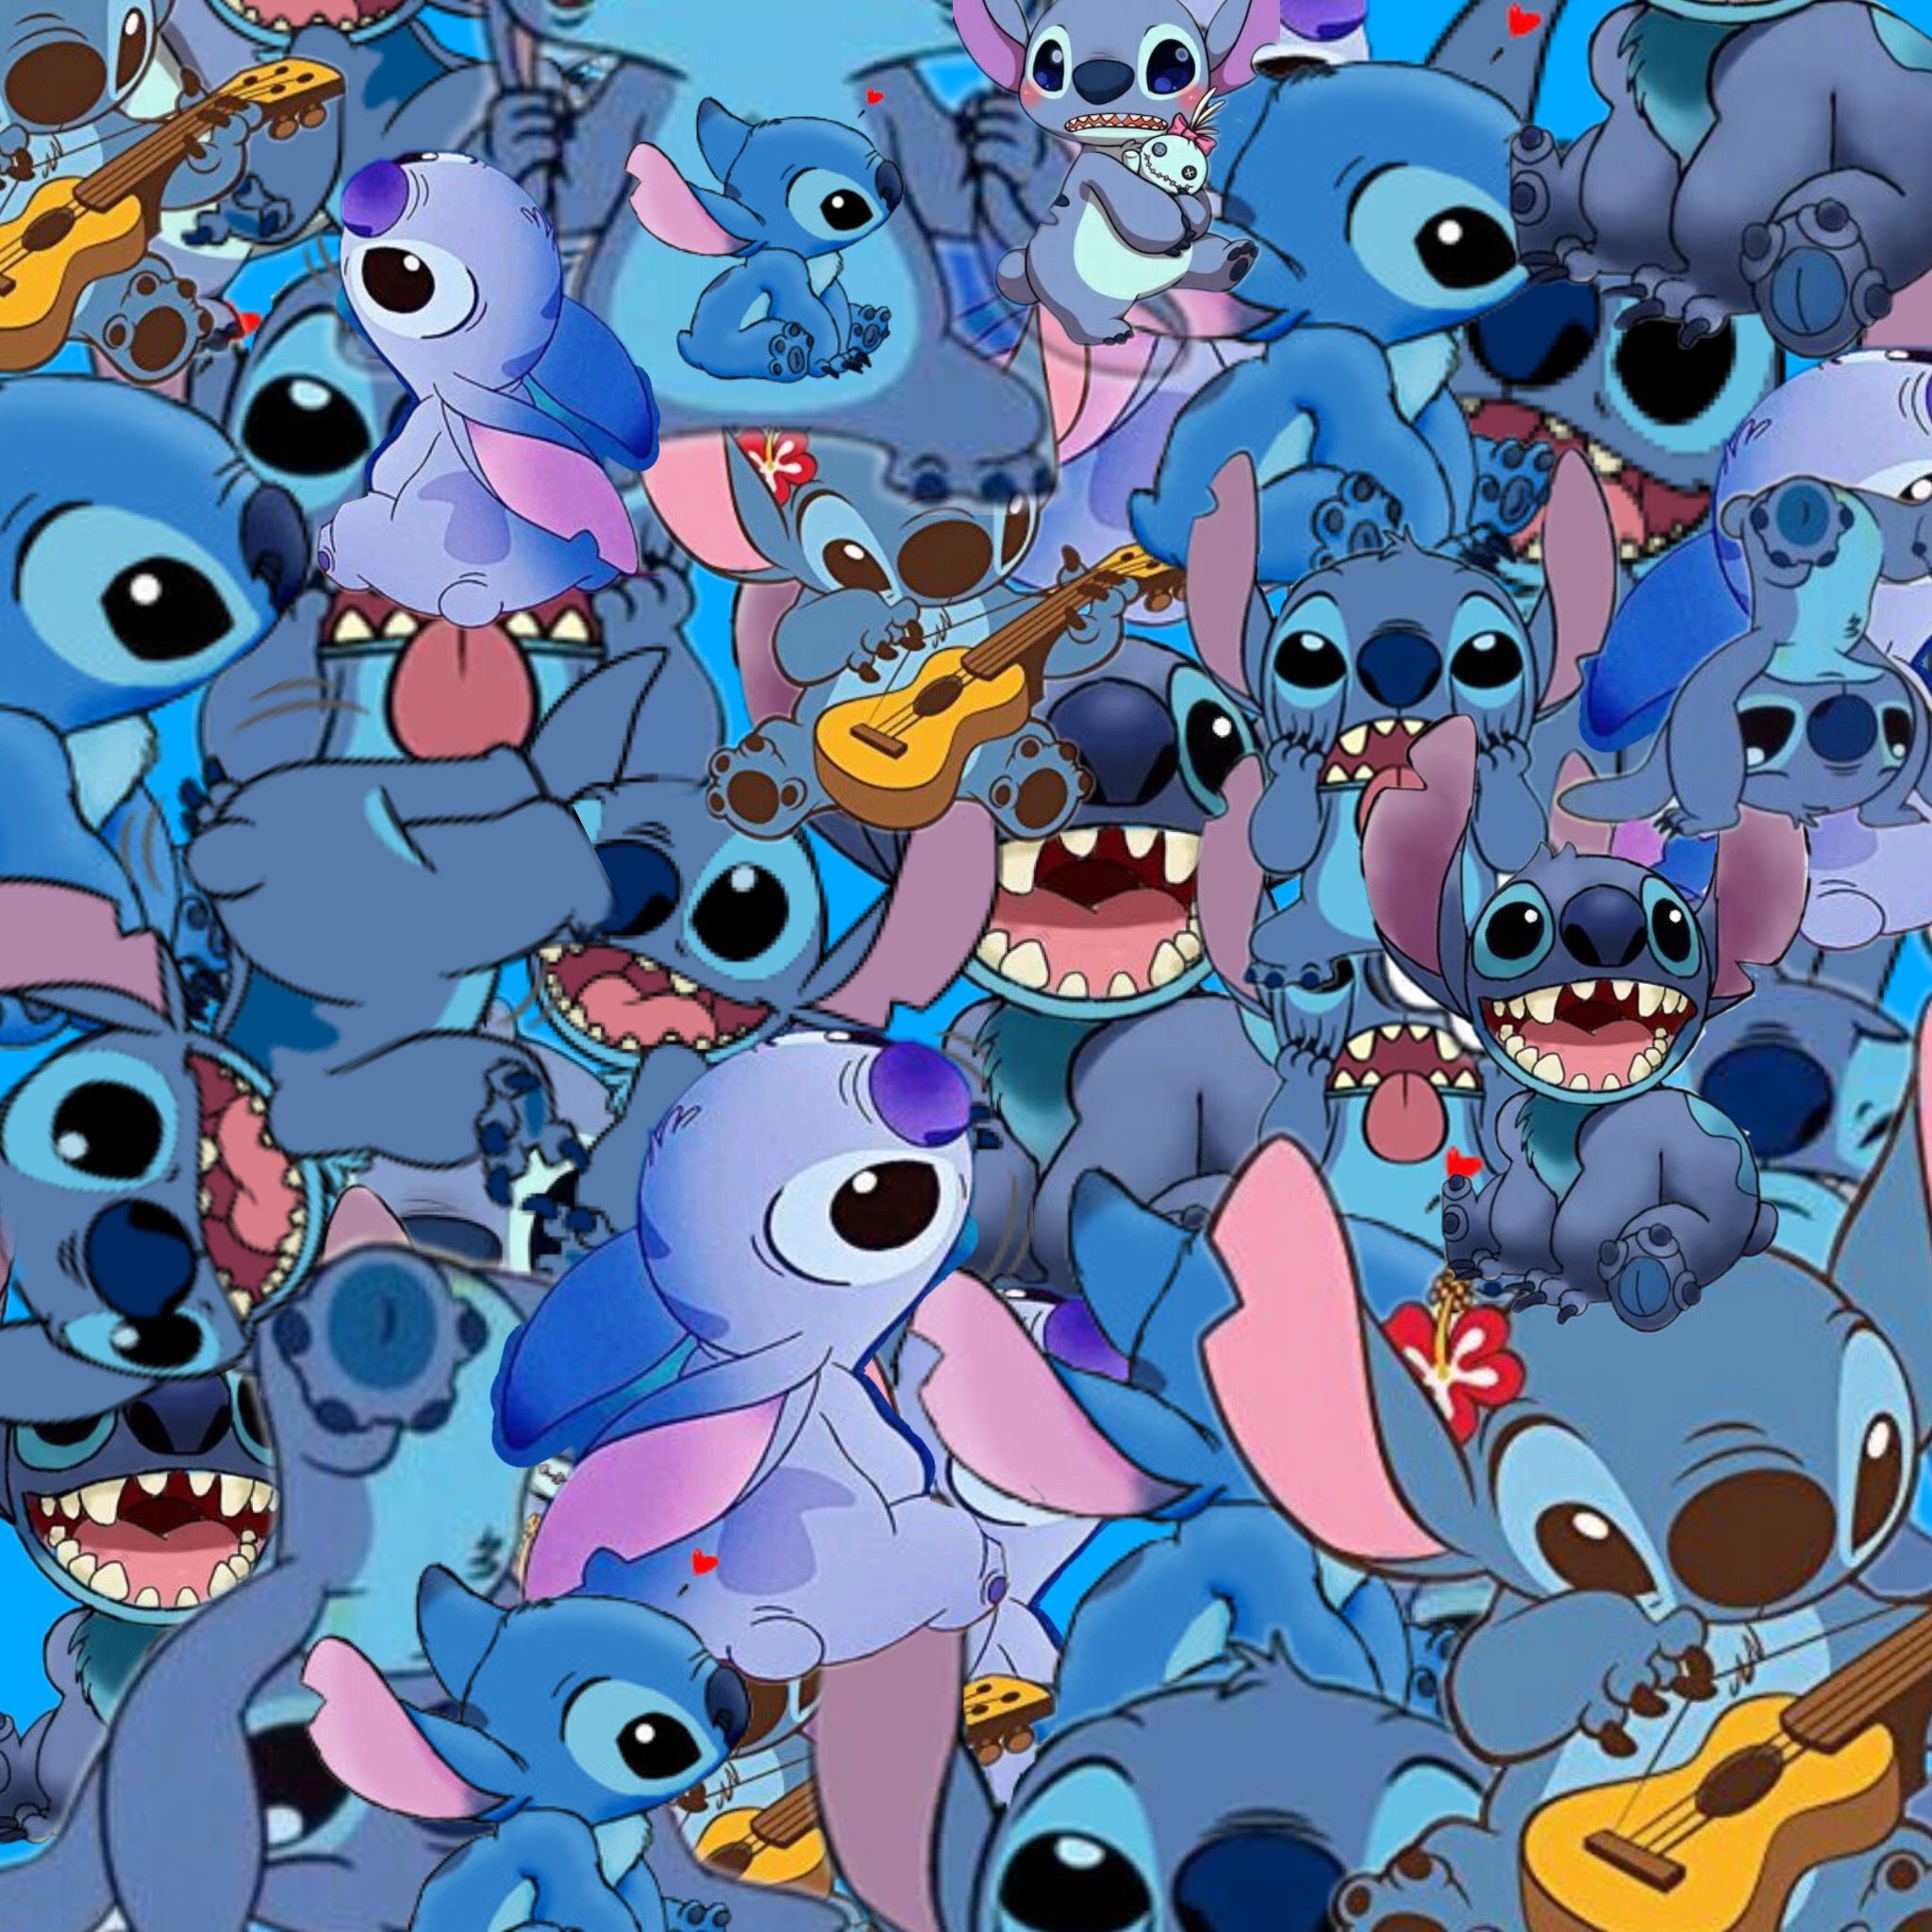 Stitch Wallpapers Wallpaper Cave - Reverasite